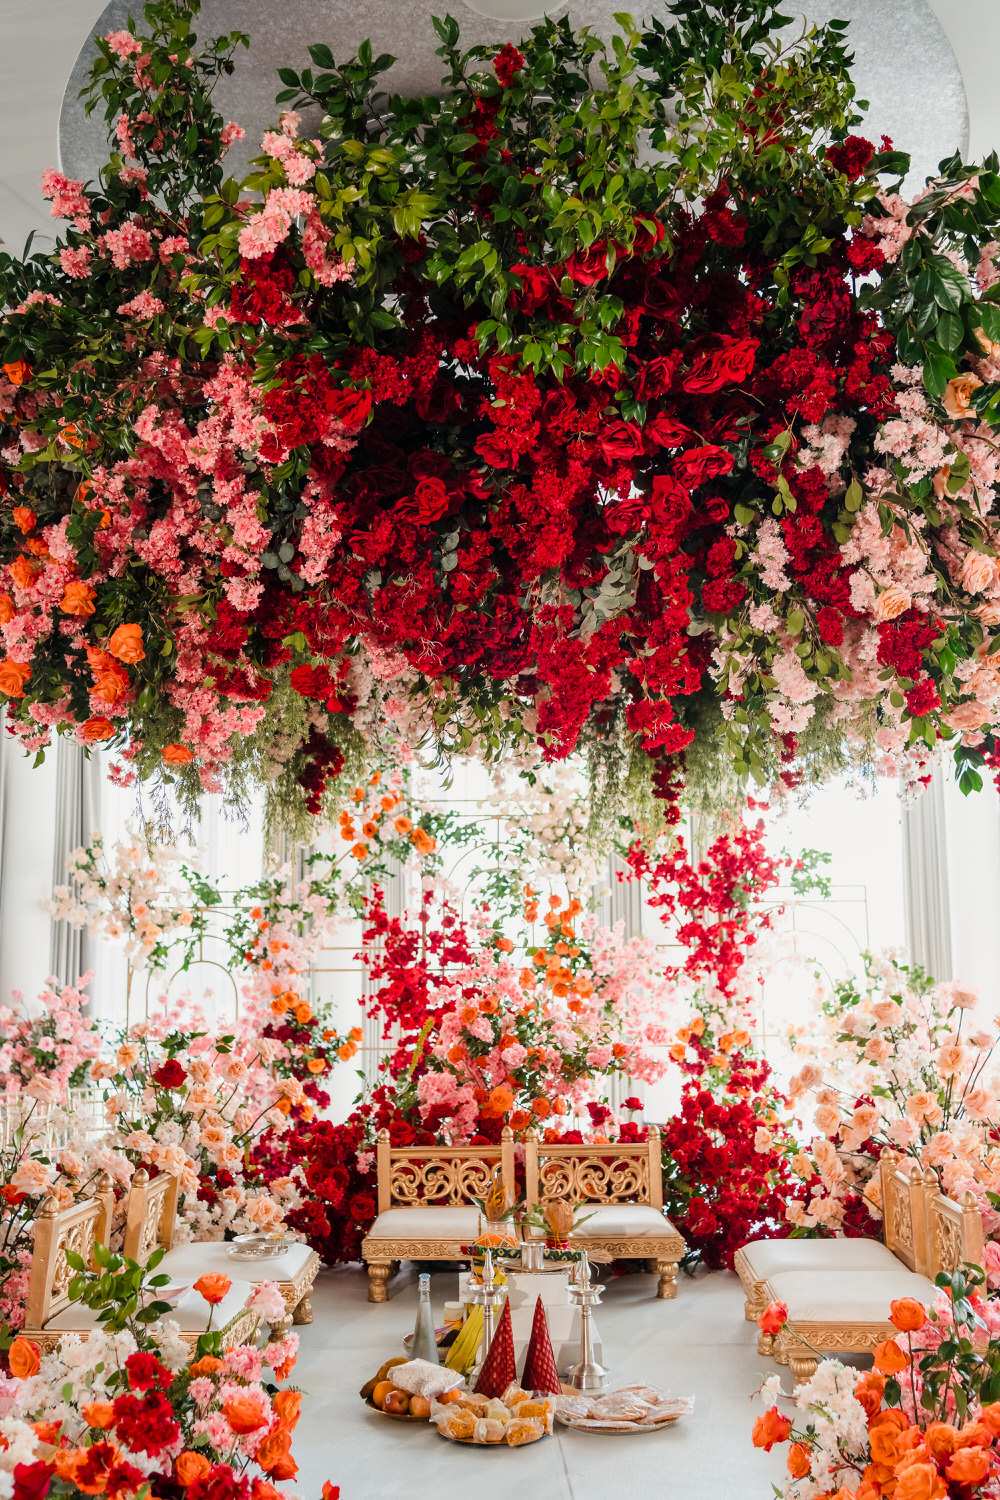 A room filled with flowers hanging from the ceiling.